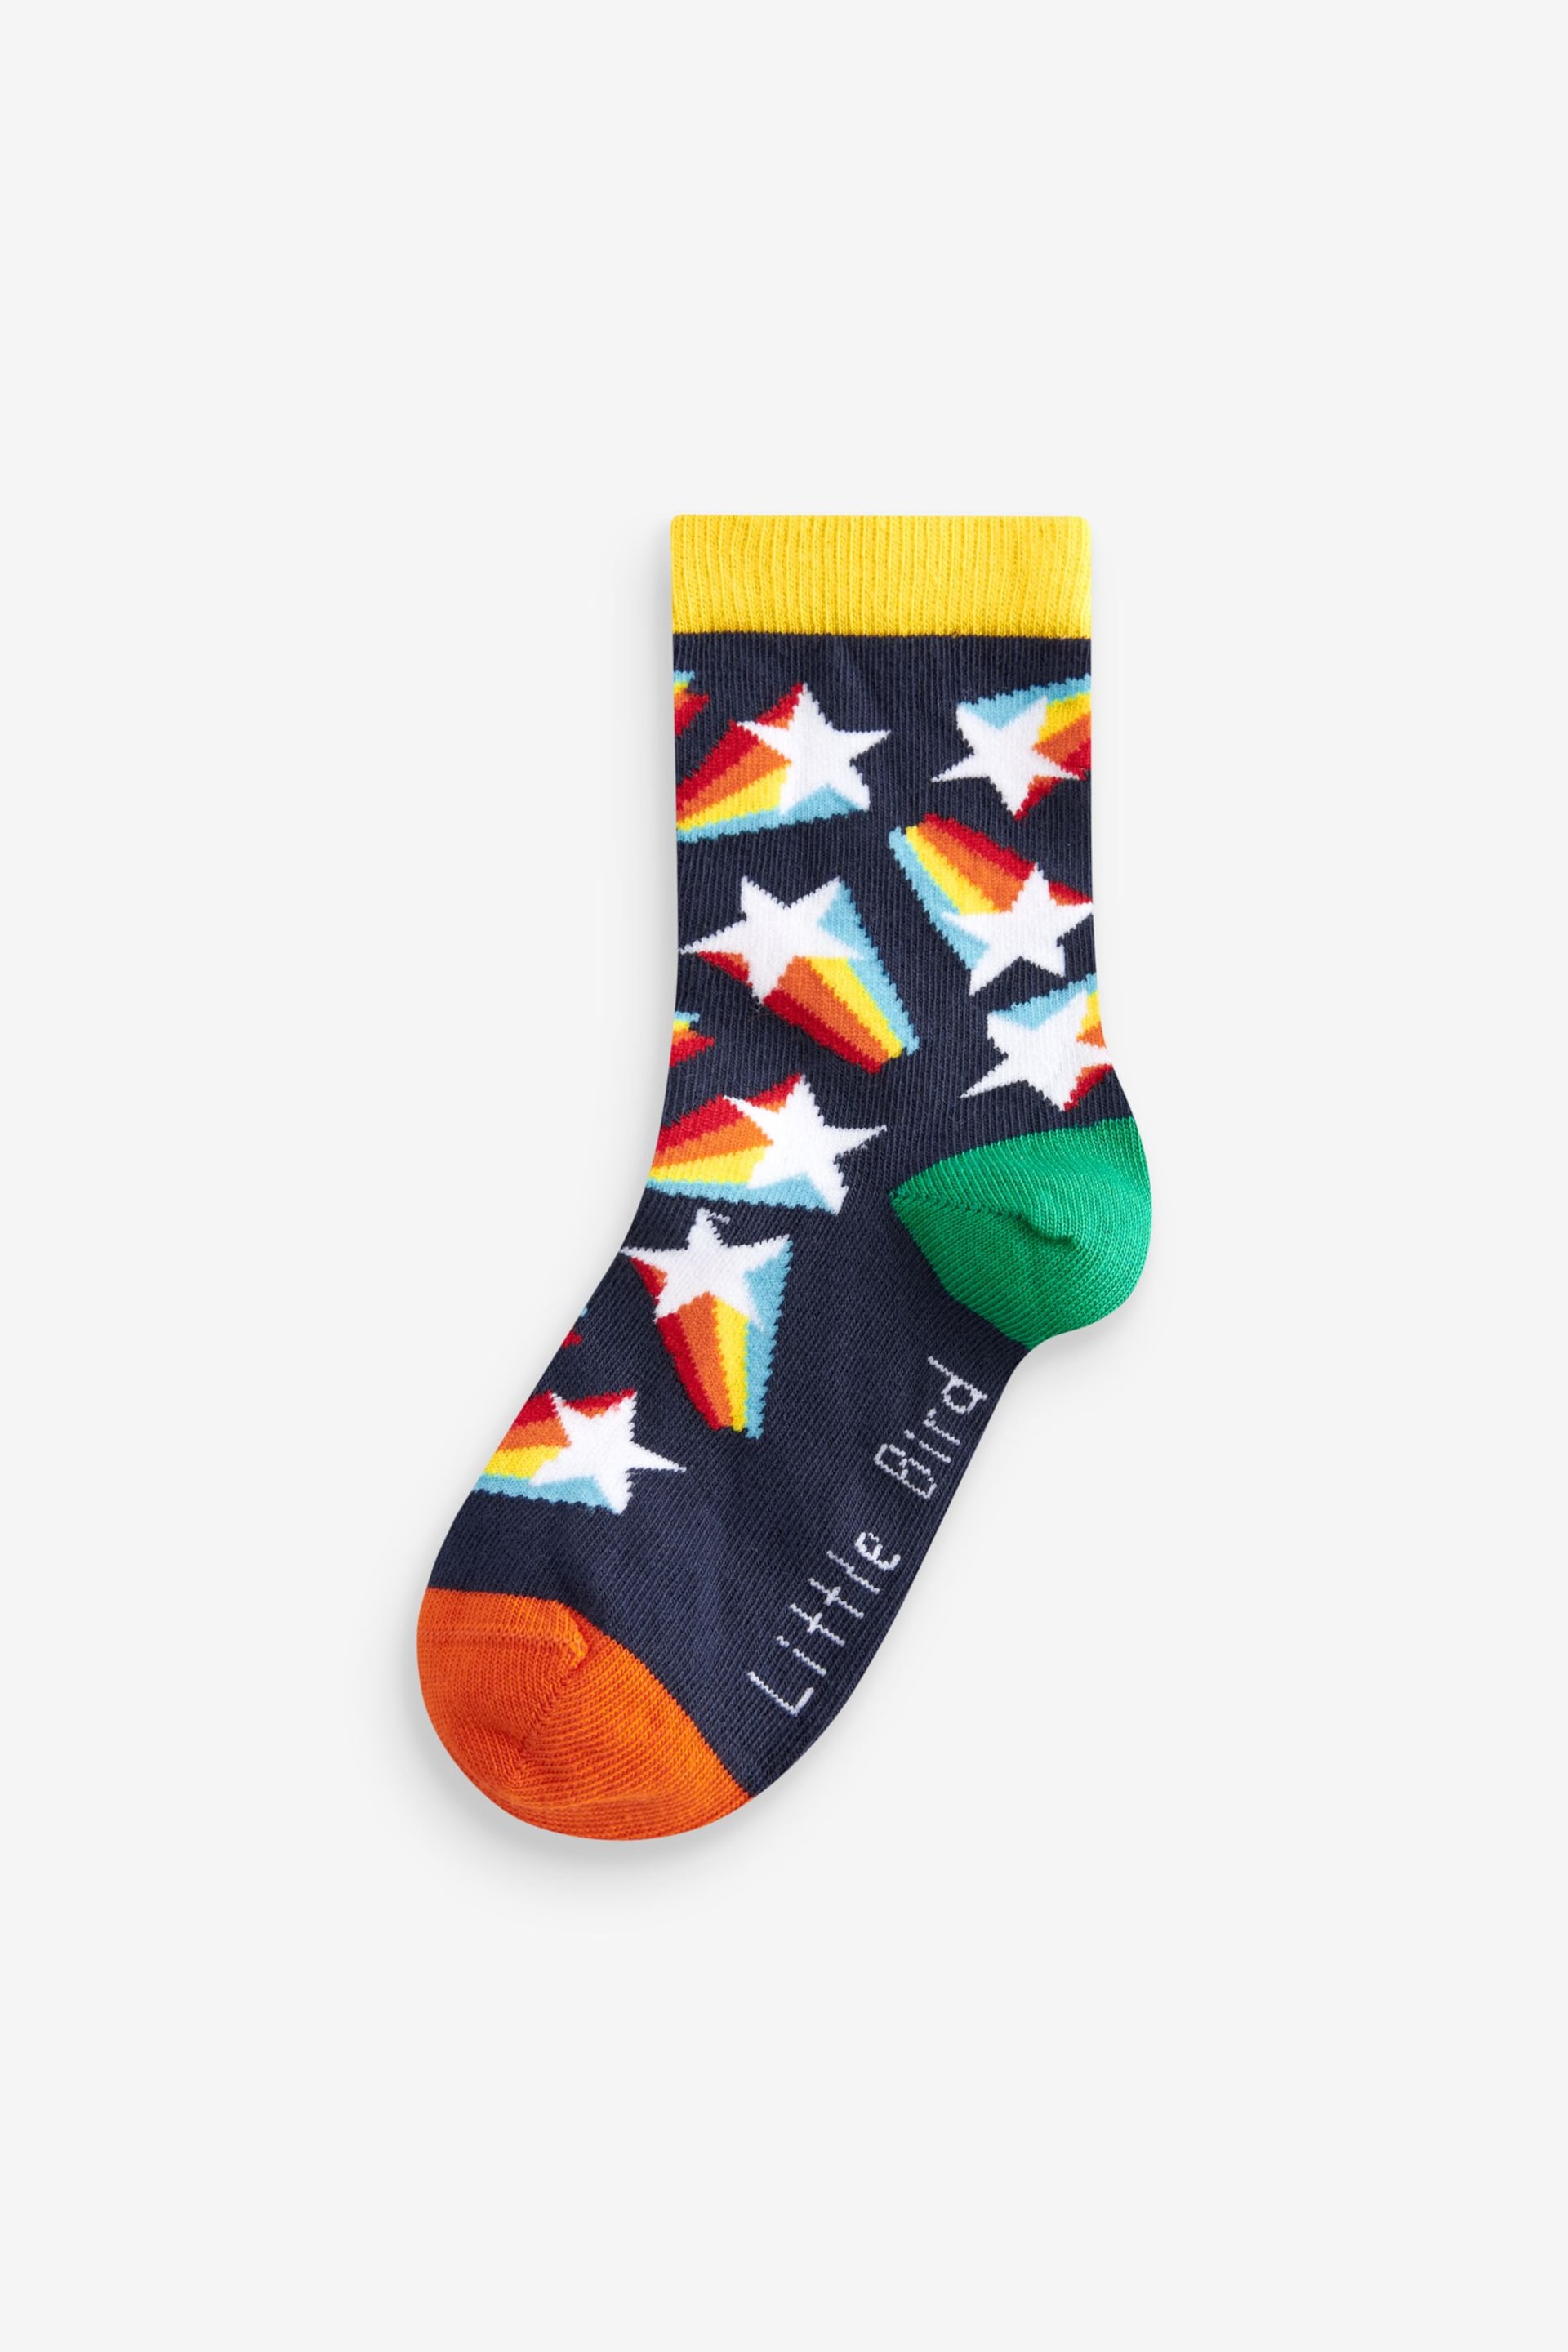 Little Bird by Jools Oliver Multi Star and Checkerboard Socks 5 Pack - Image 4 of 11